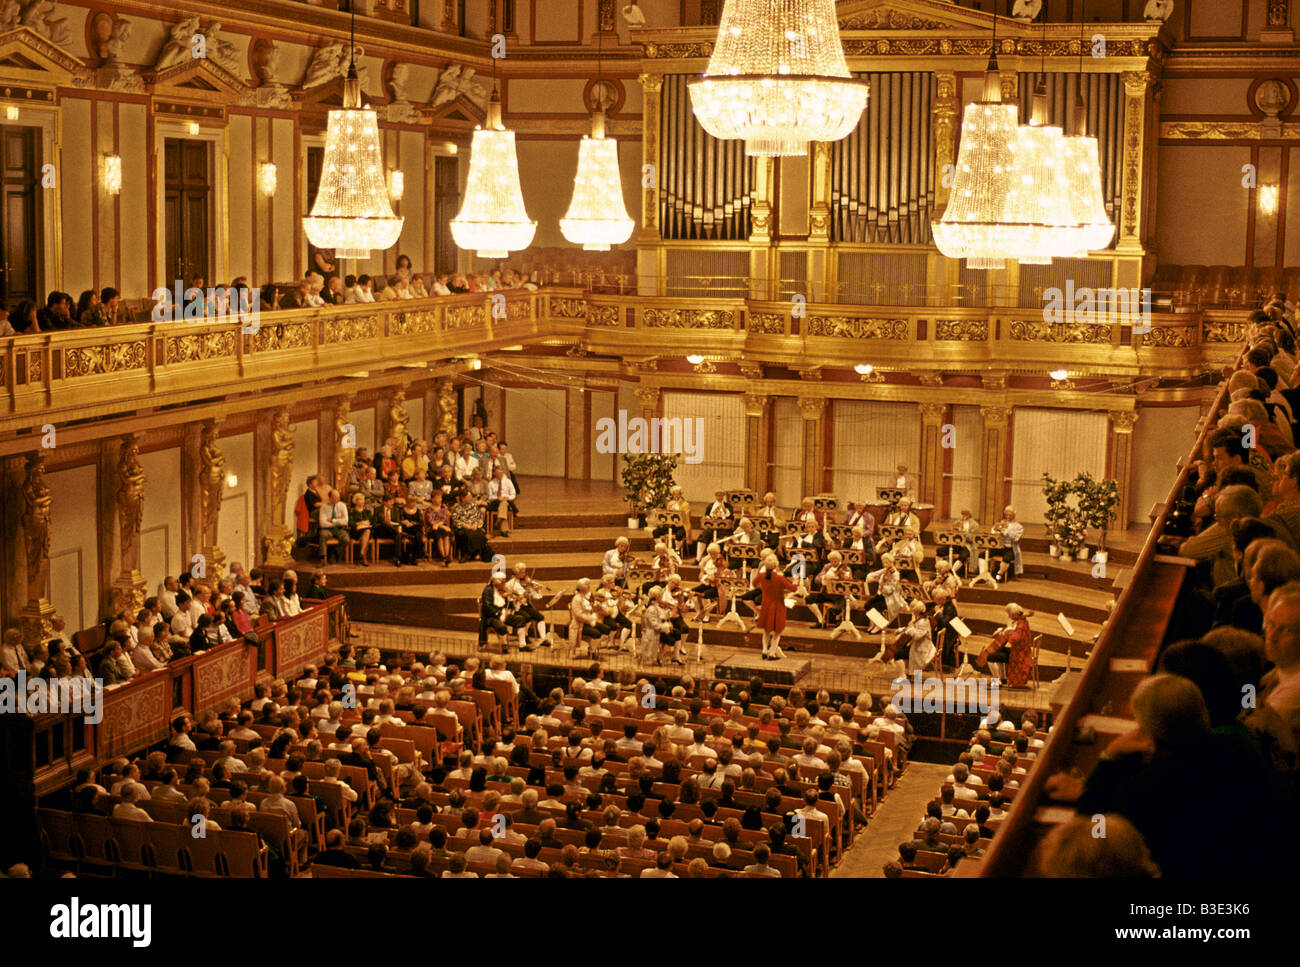 VIENNA 1995 THE MOZART PLAYERS DRESSED IN PERIOD COSTUME ON STAGE DURING A PERFORMANCE OF MOZART IN MUSIKVERIN Stock Photo